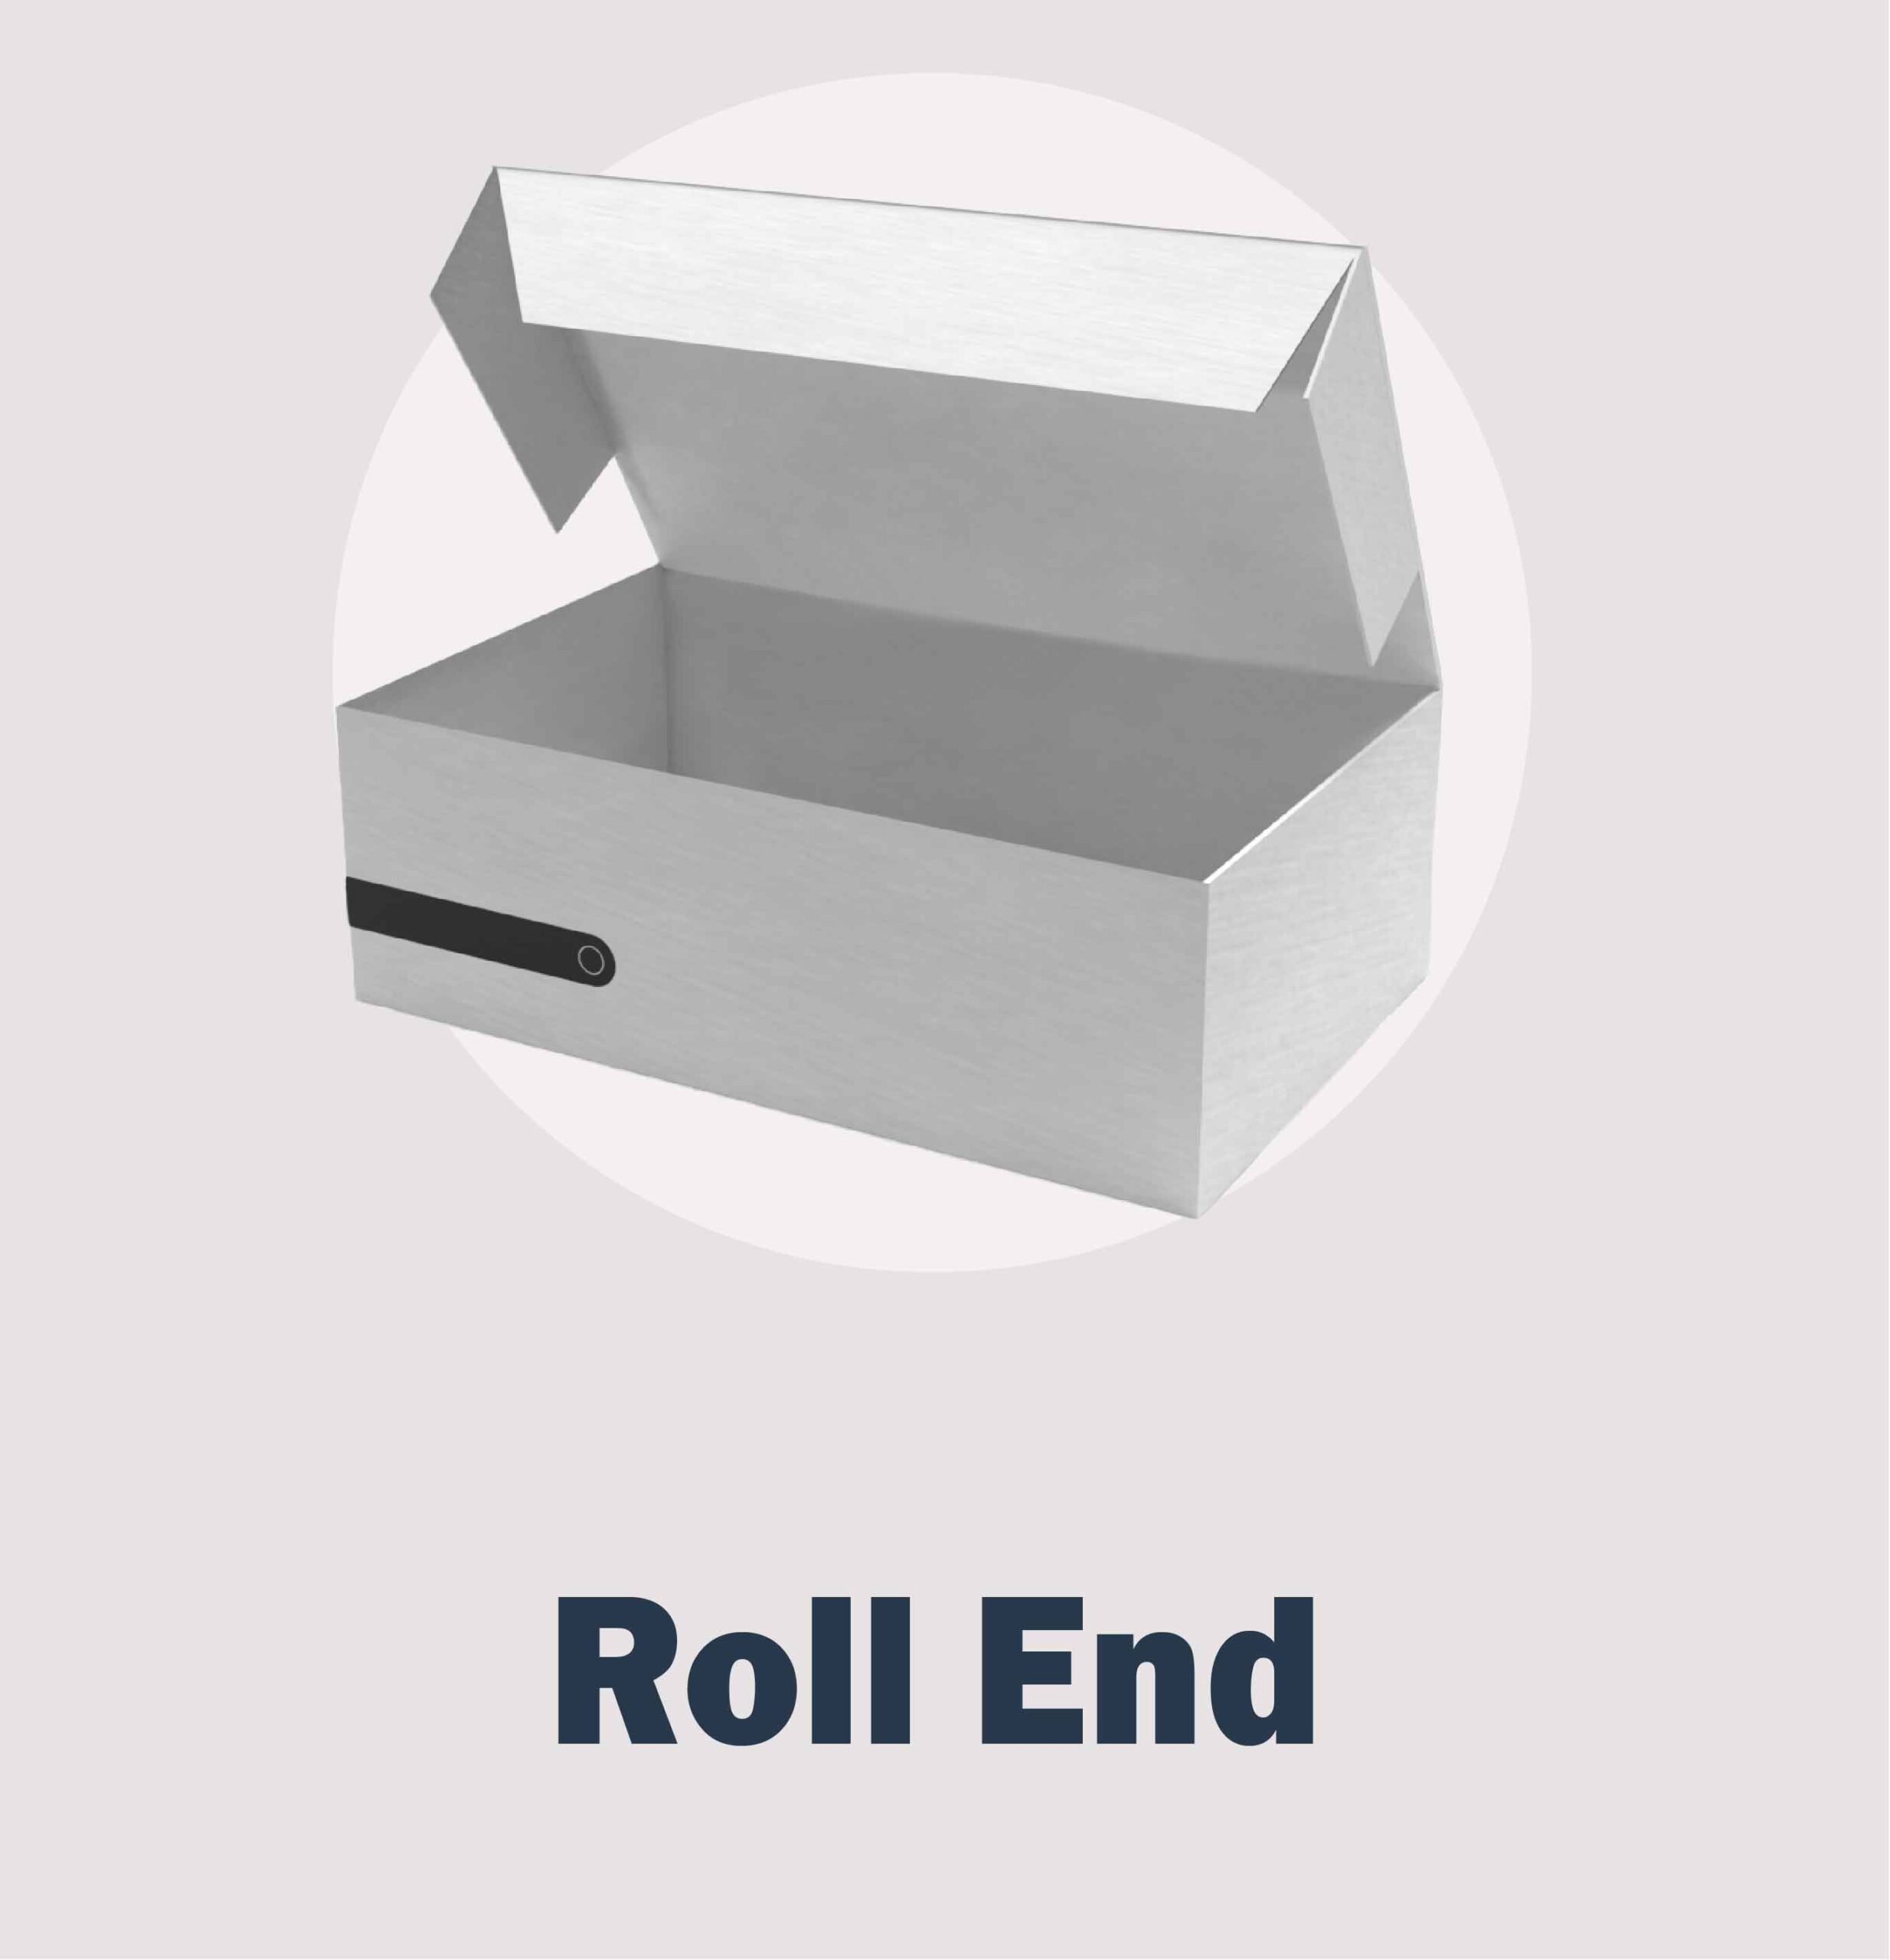 Roll-end_232x240-01